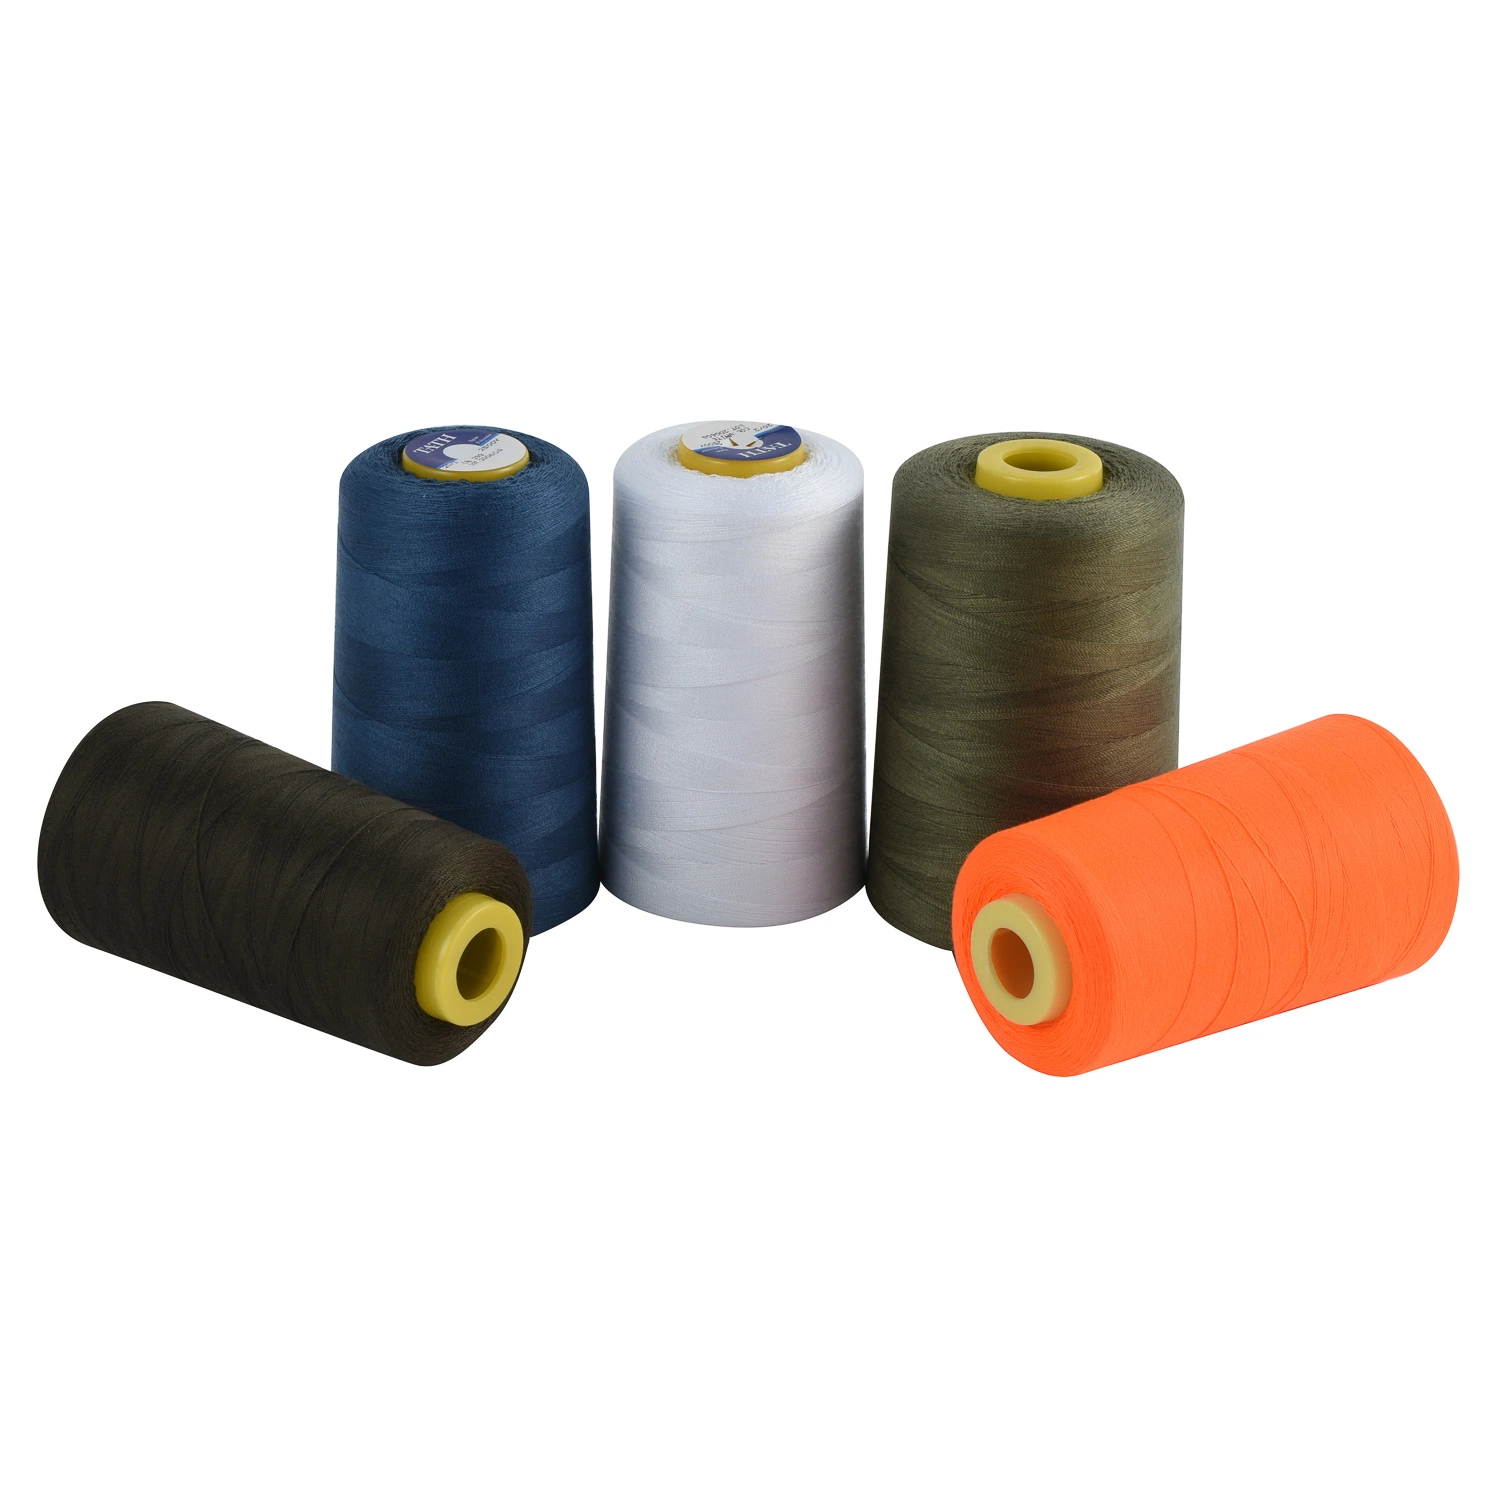 Top Grade Tfo 20s/3 (TEX90) 4000m Sewing Machine Spun Polyester Sewing Thread